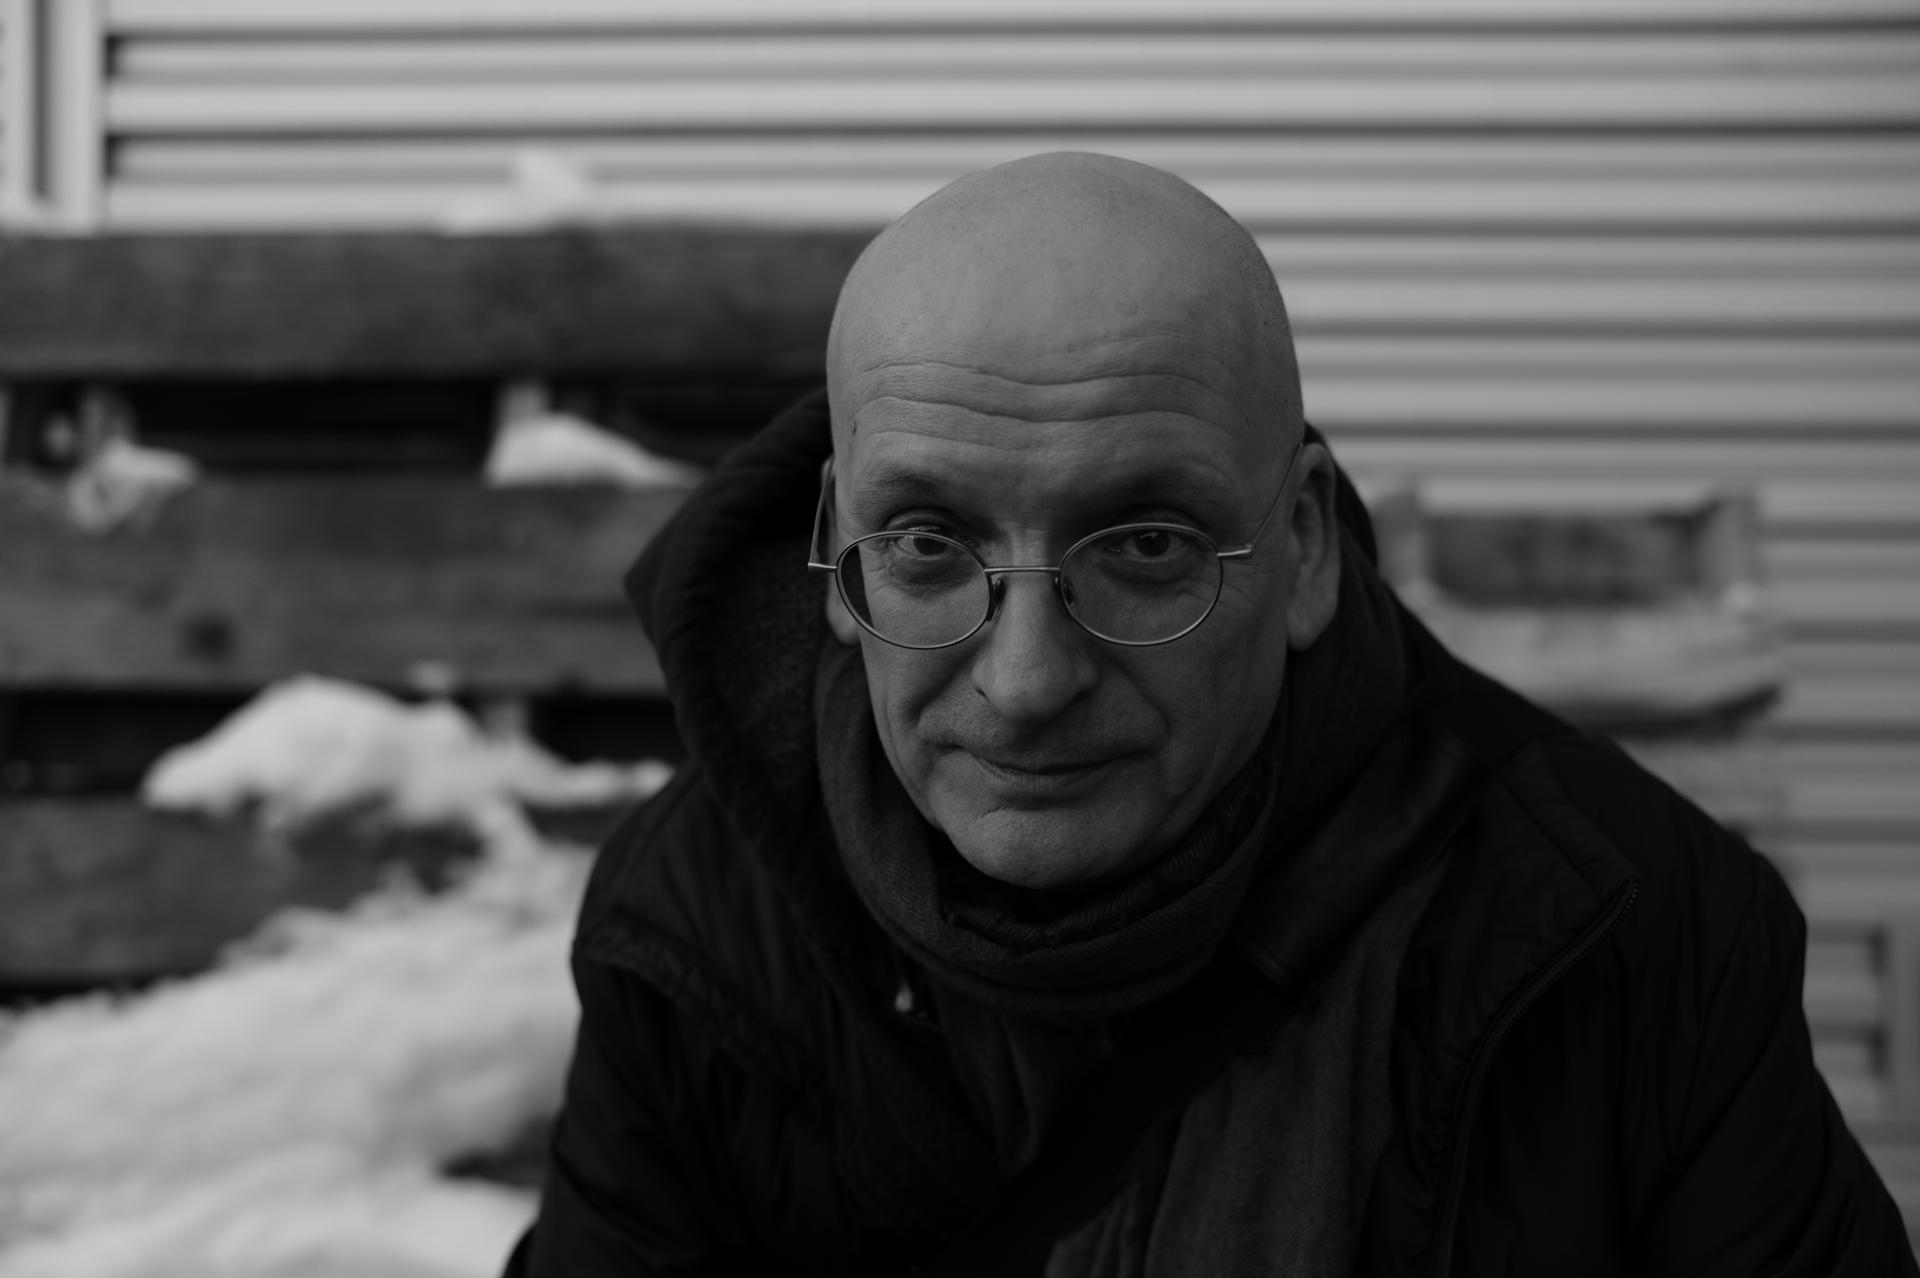 Roddy Doyle, author of The Guts